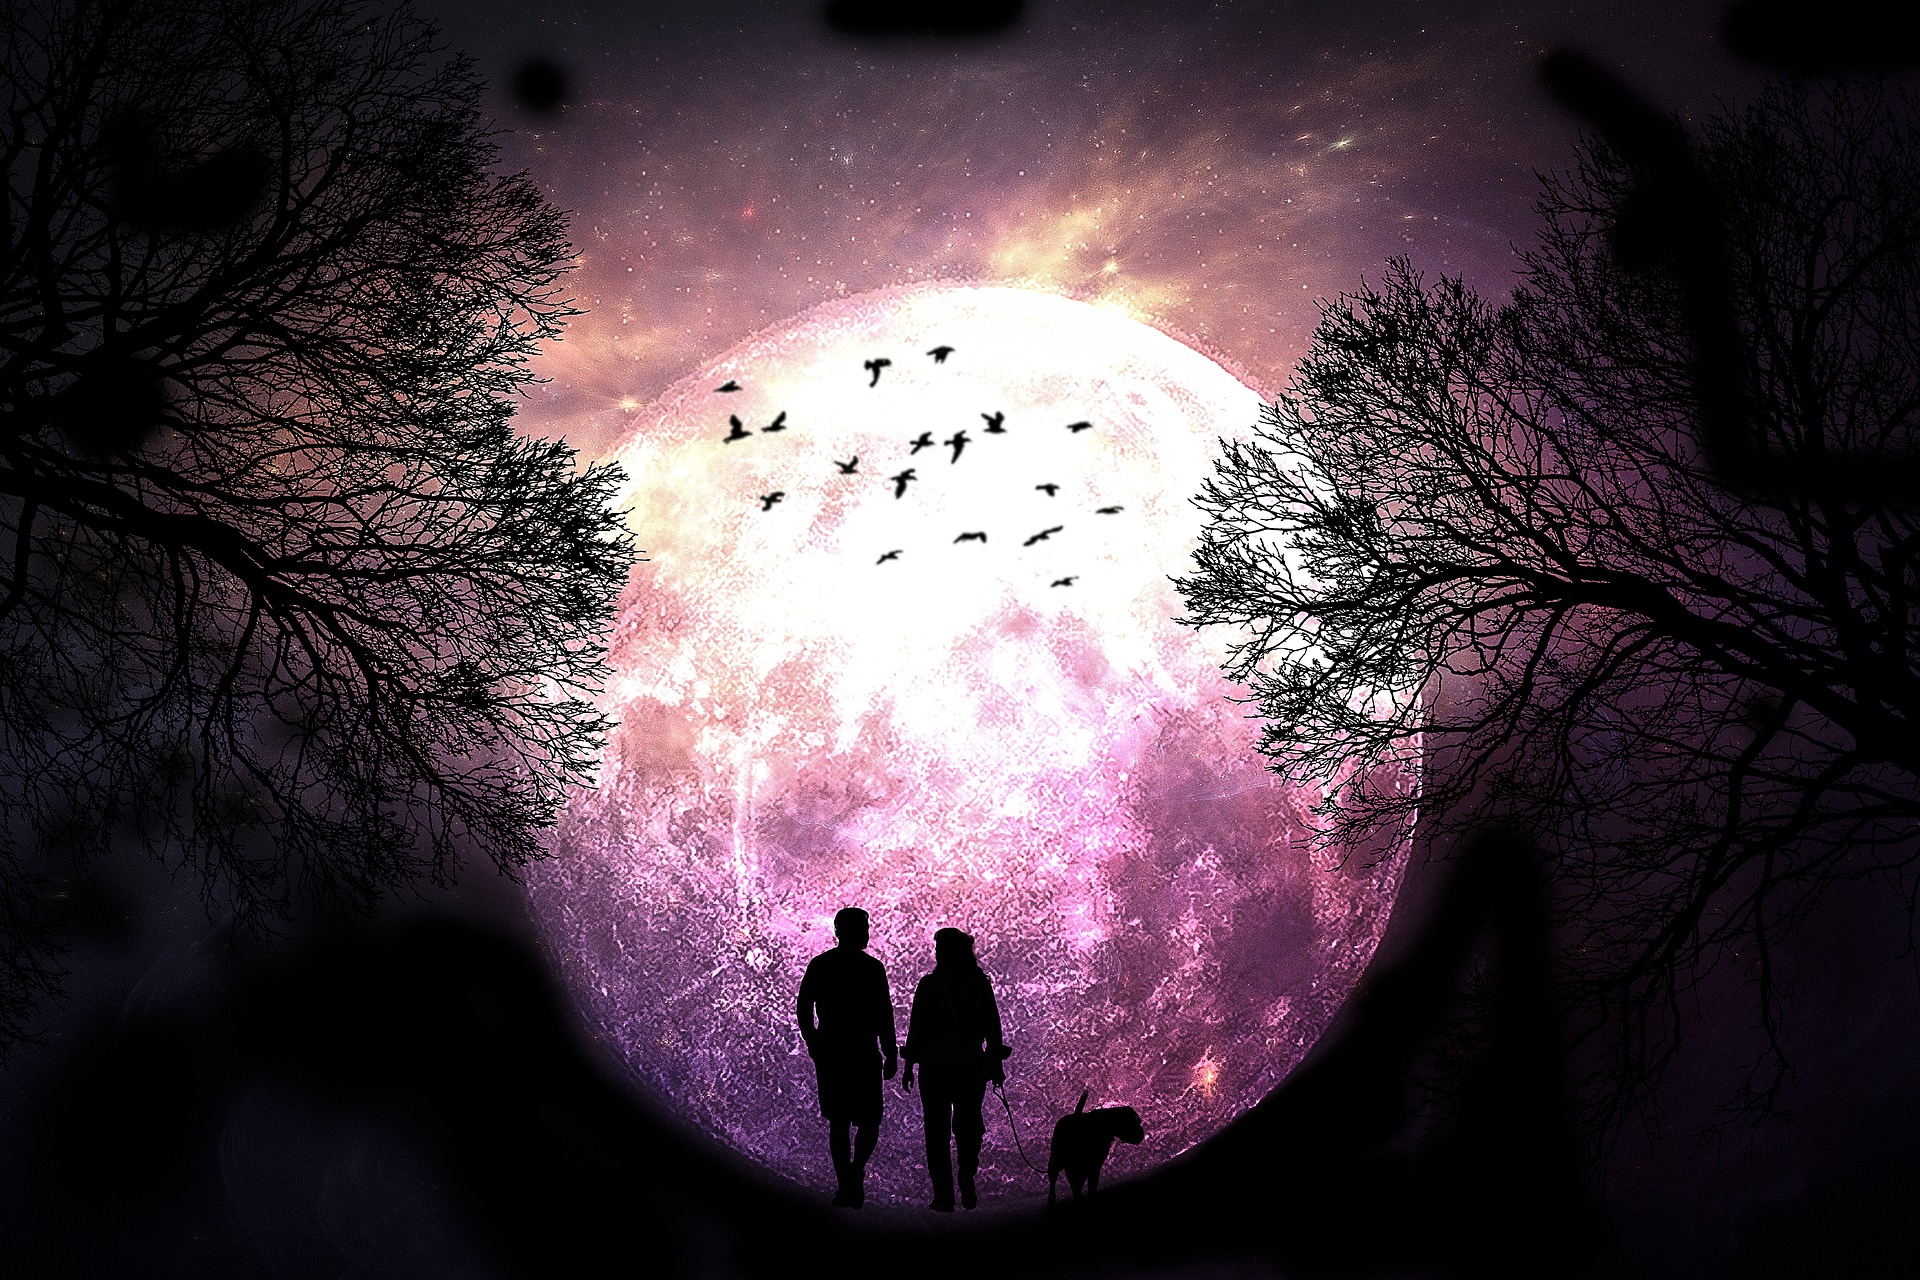 A drawn out picture of a couple with a dog, walking in front of a full moon. | Source: Pixabay